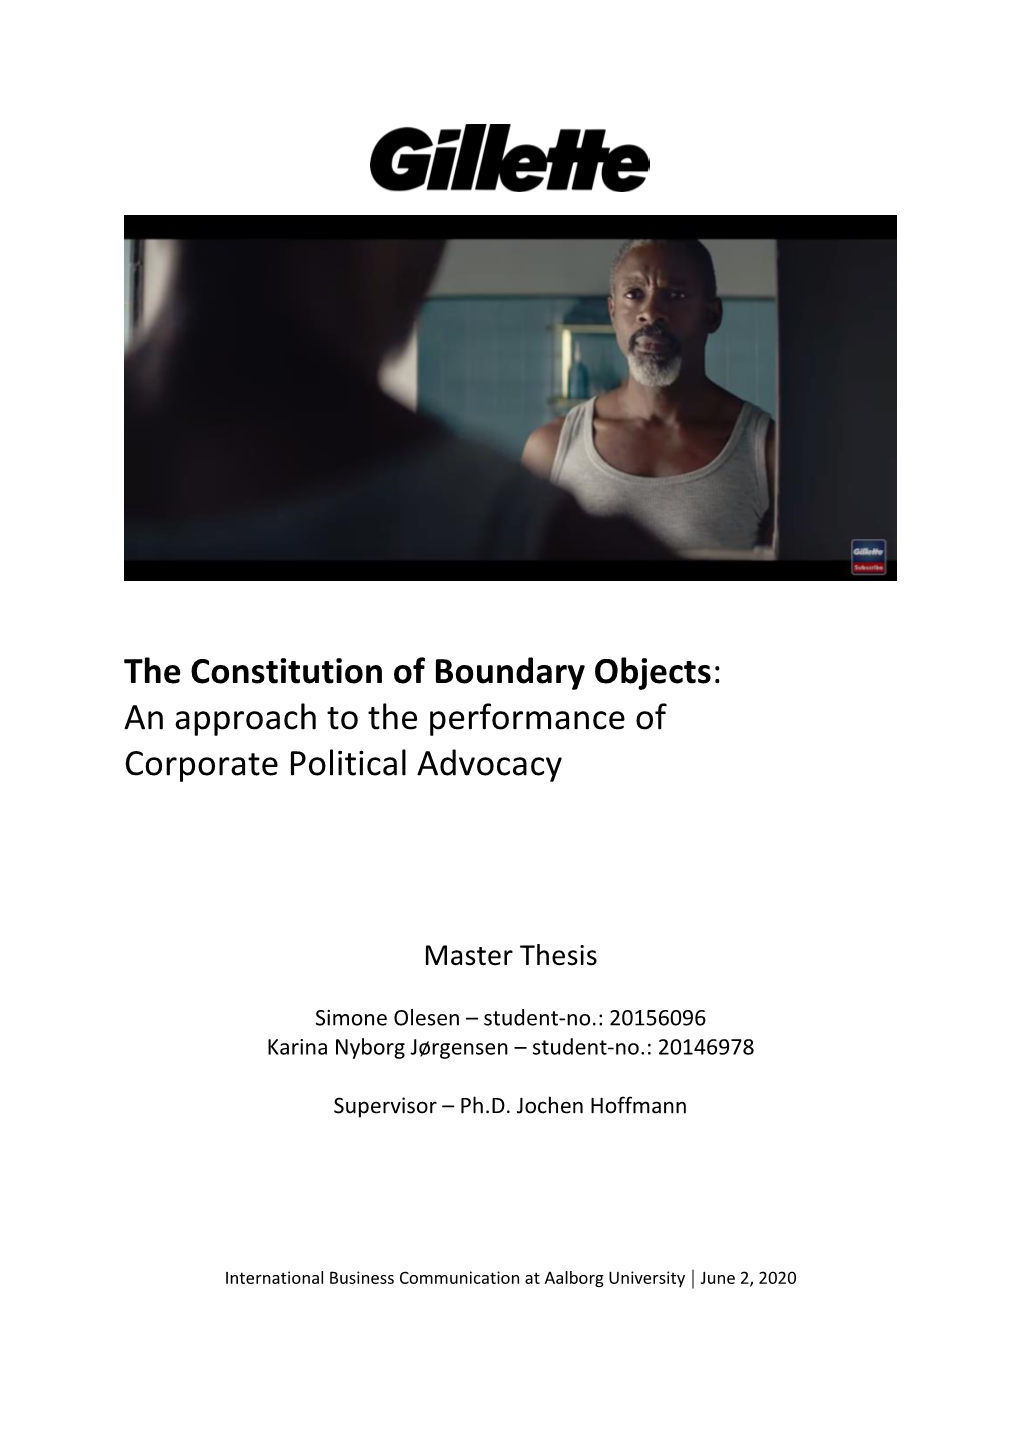 The Constitution of Boundary Objects: an Approach to the Performance of Corporate Political Advocacy